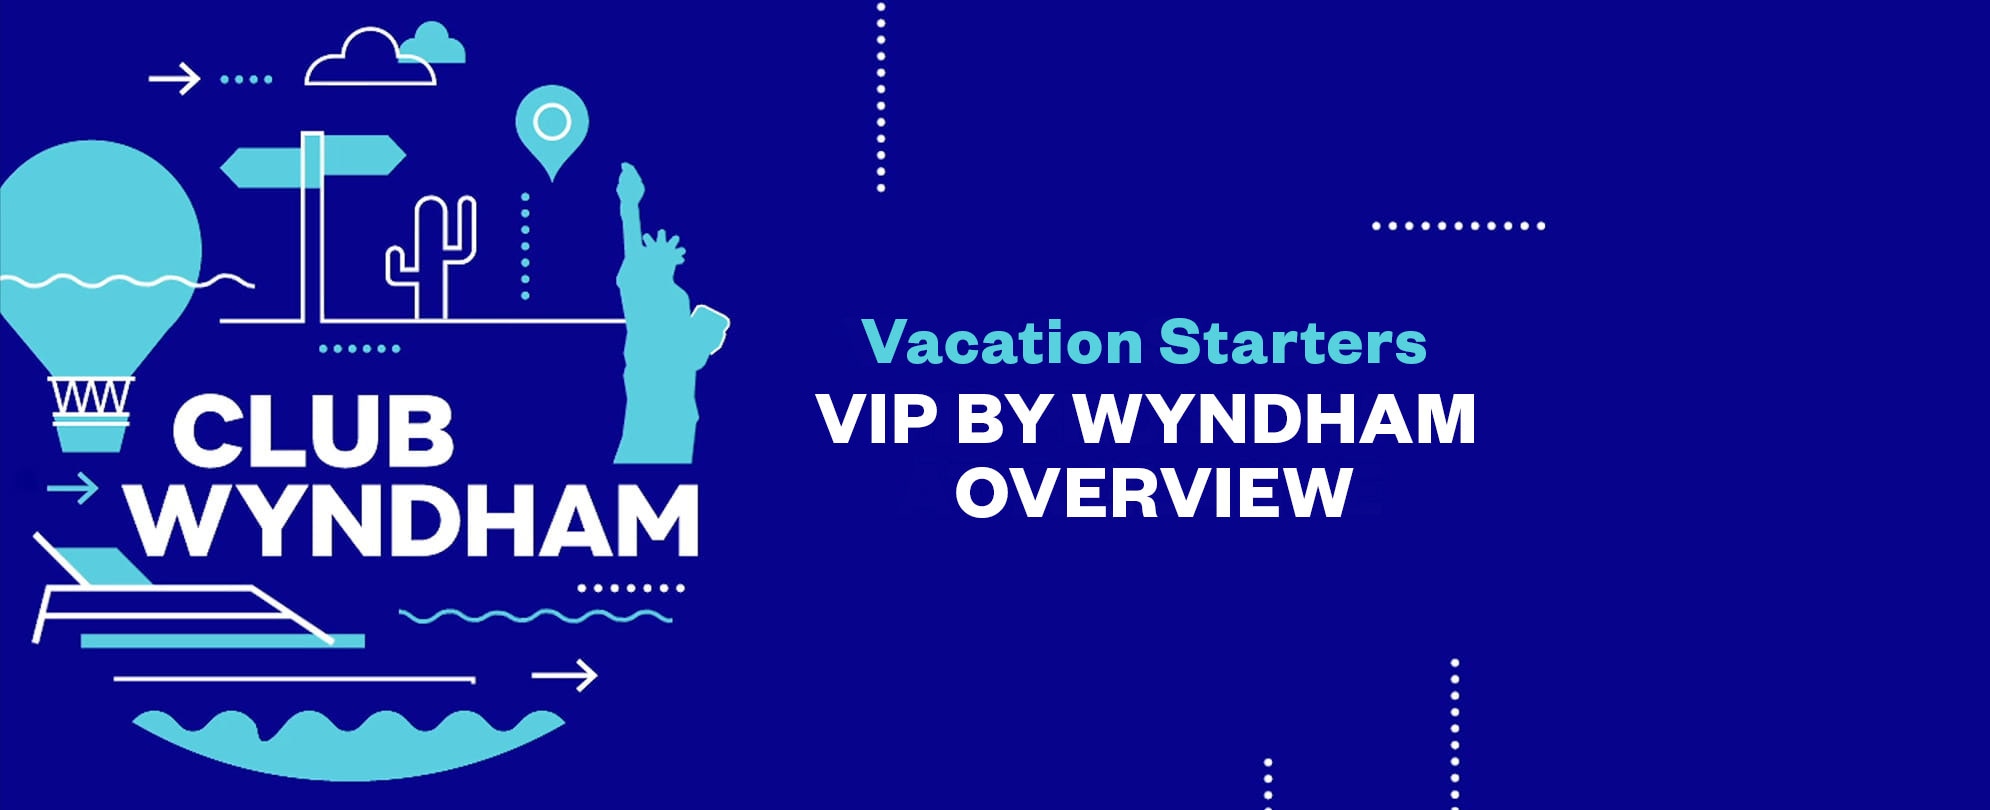 VIP by Wyndham overview from the Club Wyndham Vacation Starters video series